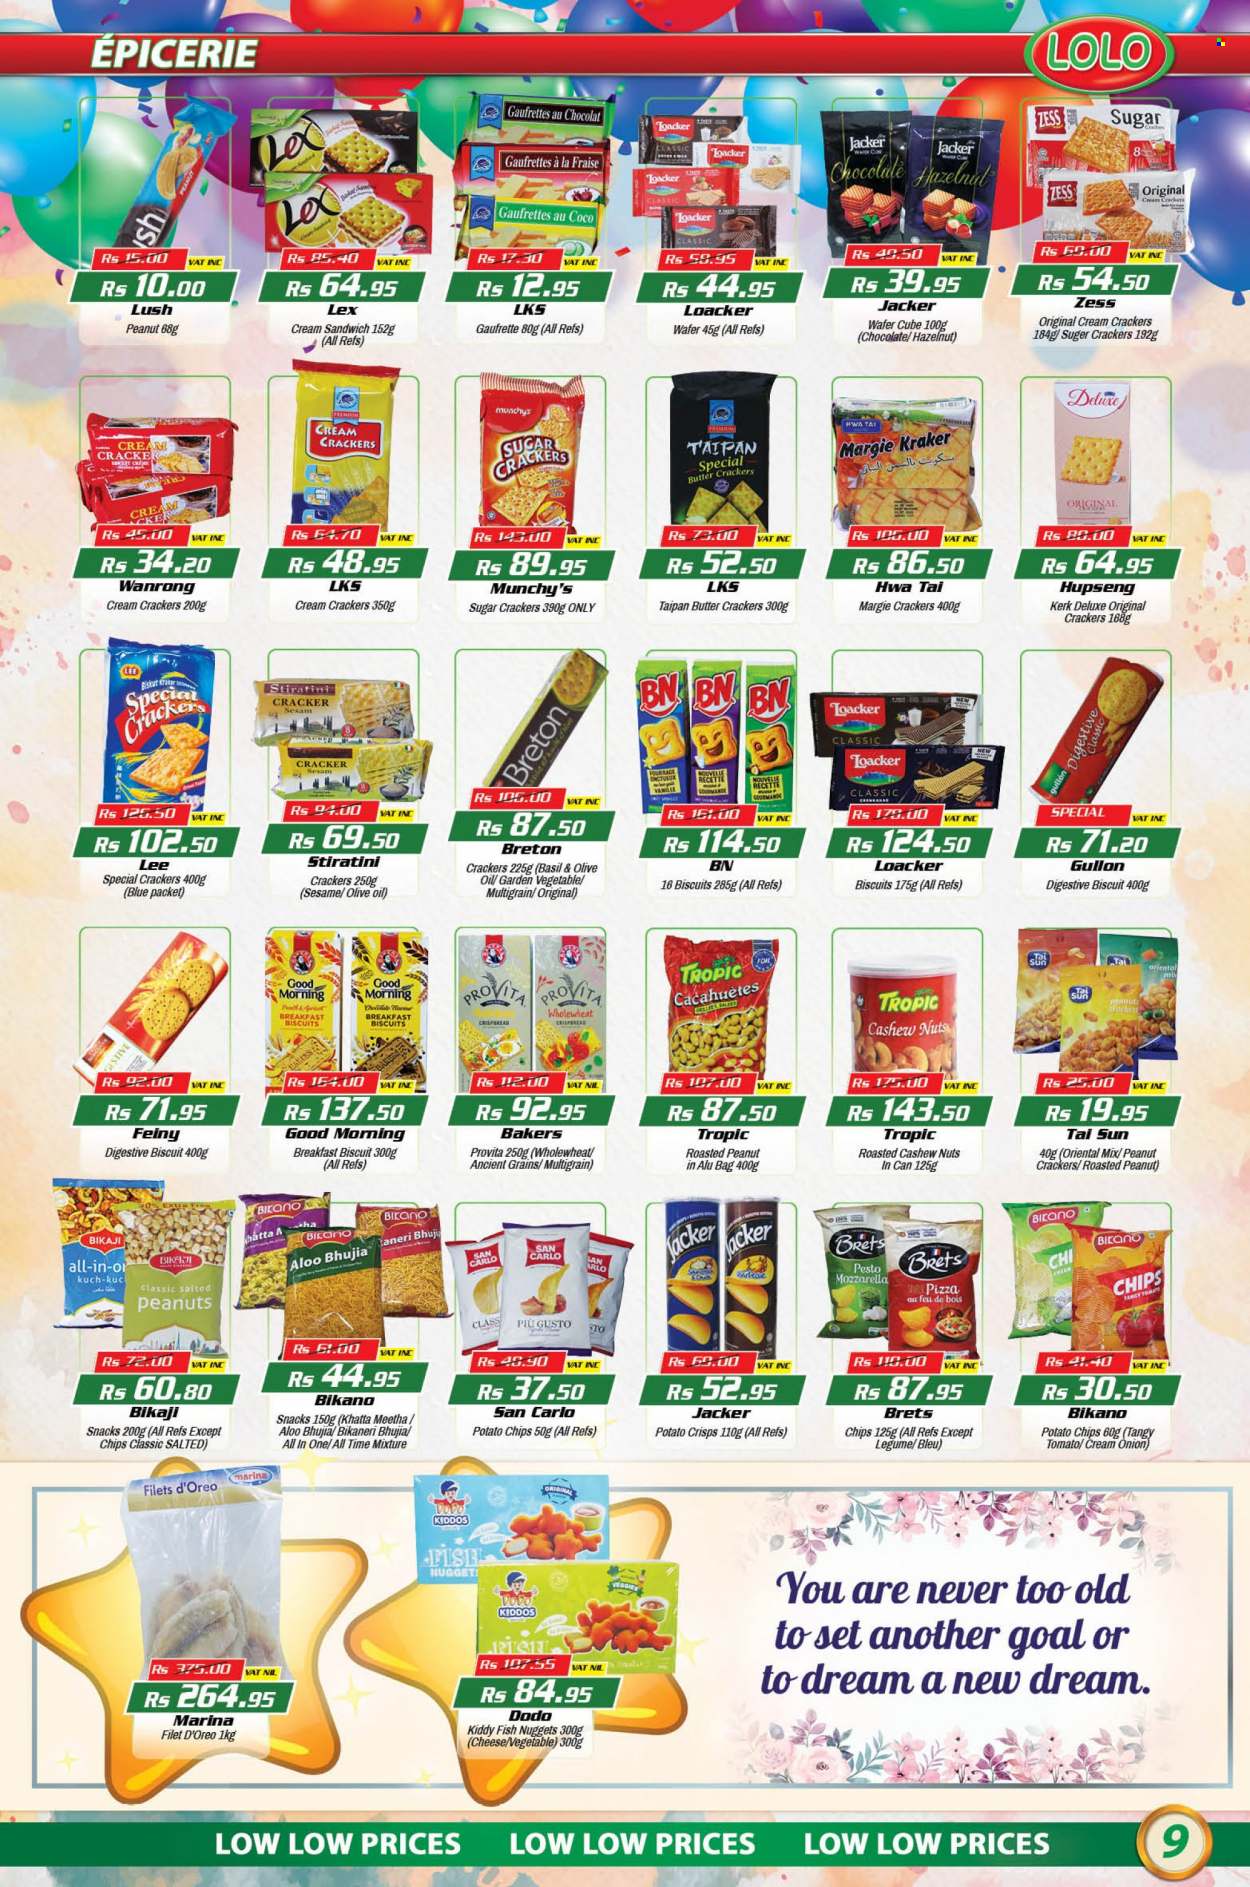 thumbnail - LOLO Hyper Catalogue - 26.07.2022 - 16.08.2022 - Sales products - crispbread, onion, fish, fish nuggets, pizza, butter, wafers, chocolate, snack, crackers, biscuit, Digestive, potato crisps, potato chips, chips, sugar, bhujia, olive oil, oil, cashews, peanuts, Tai Sun, Bakers, Lee, goal, pesto, Oreo. Page 9.